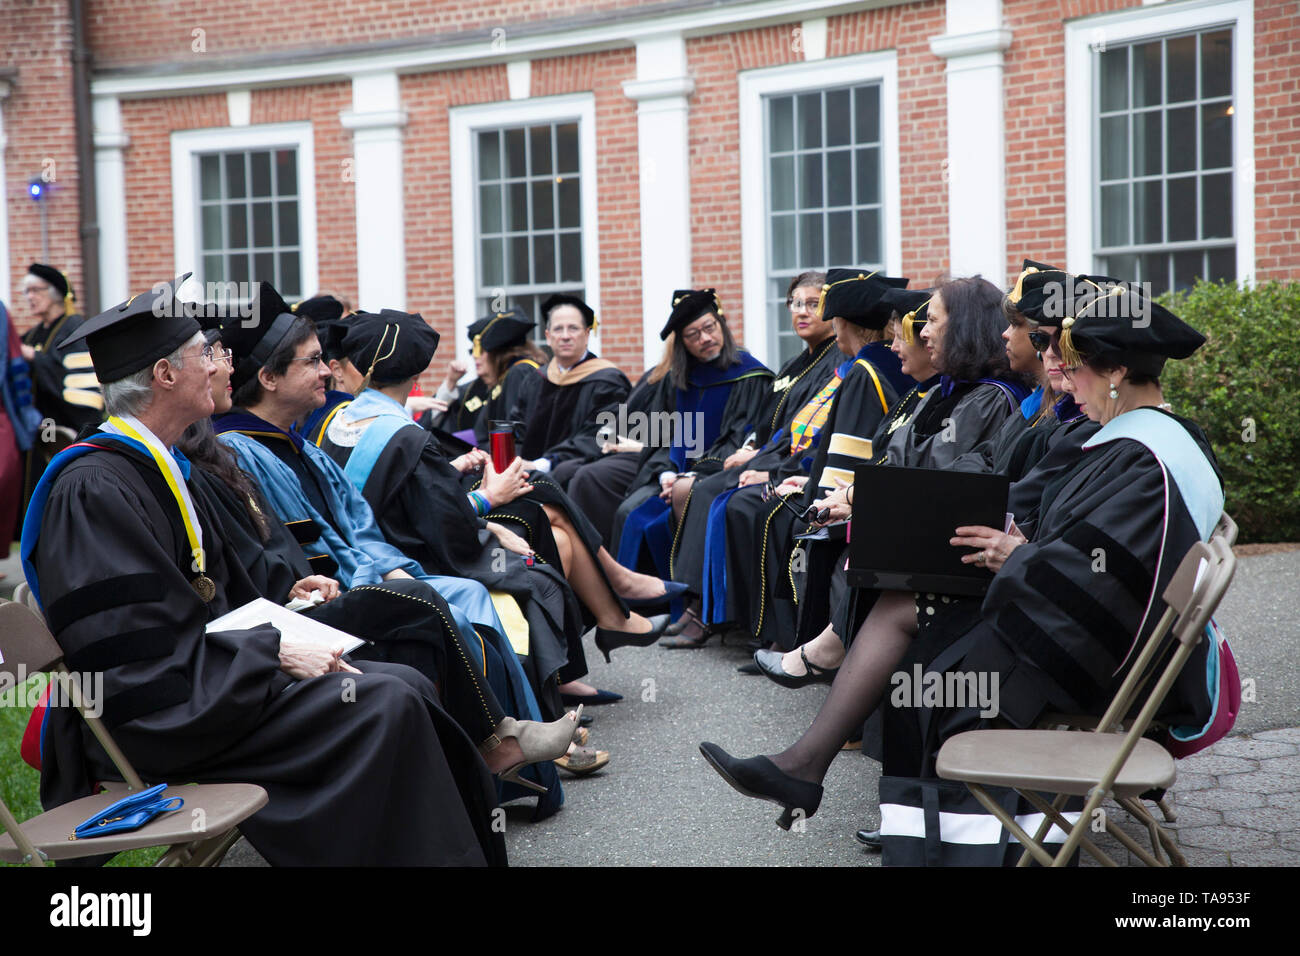 Faculty sits waiting for graduation ceremony to begin at Smith College in Northampton, Massachusetts. Stock Photo